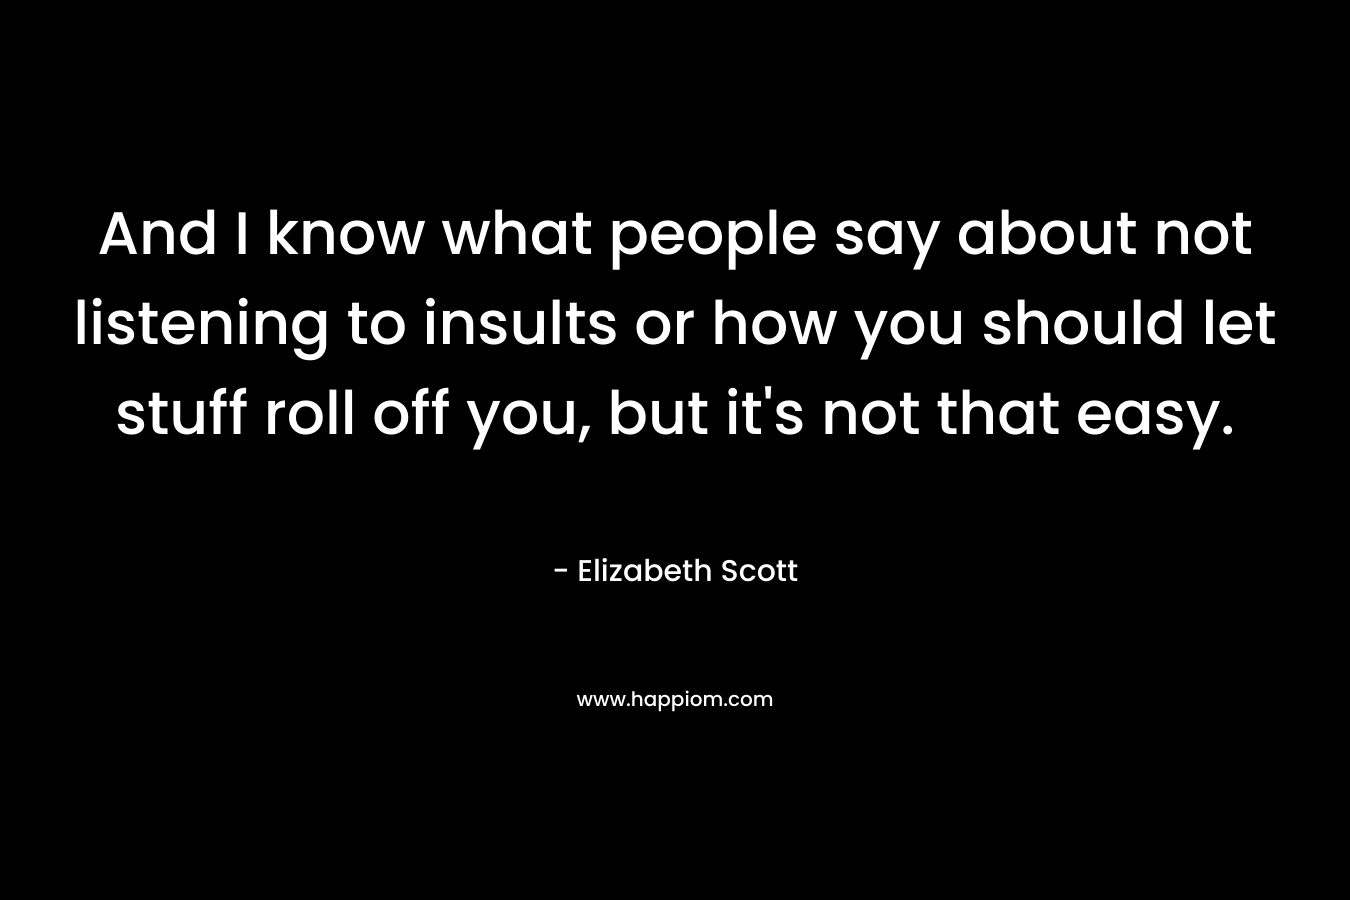 And I know what people say about not listening to insults or how you should let stuff roll off you, but it's not that easy.